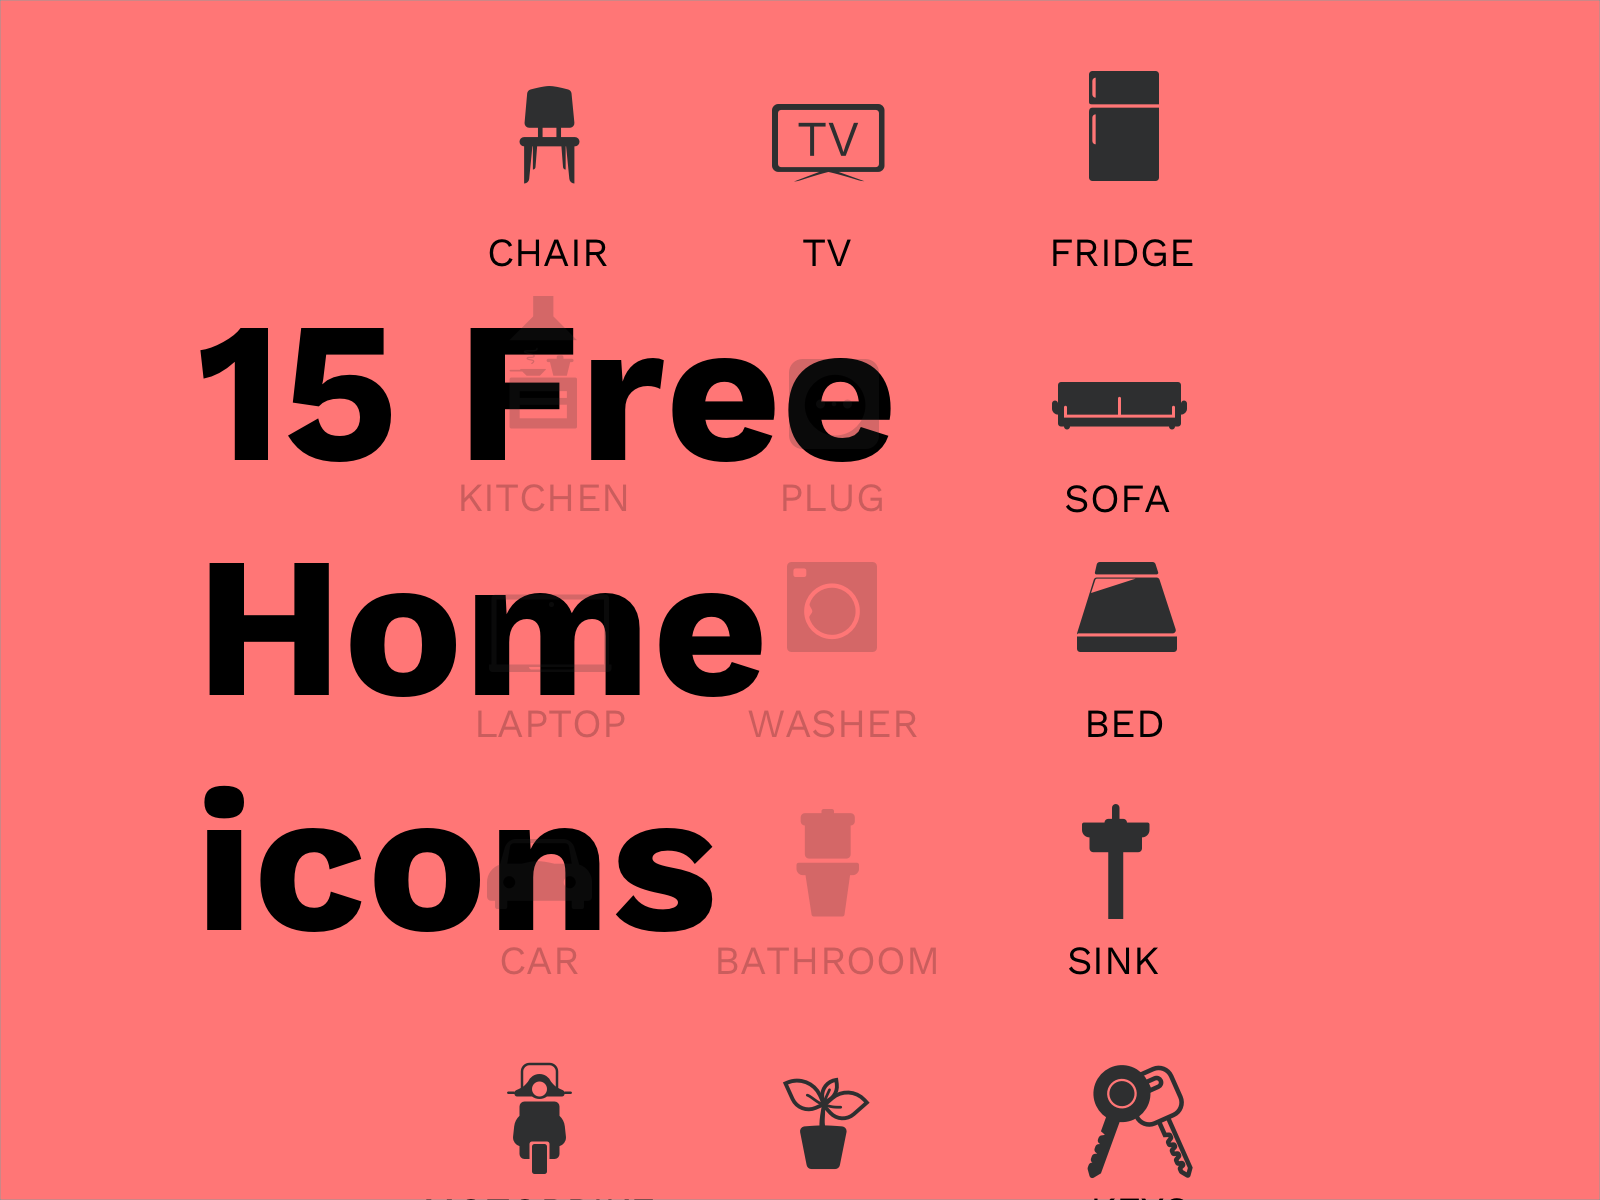 FREE HOME ICONS